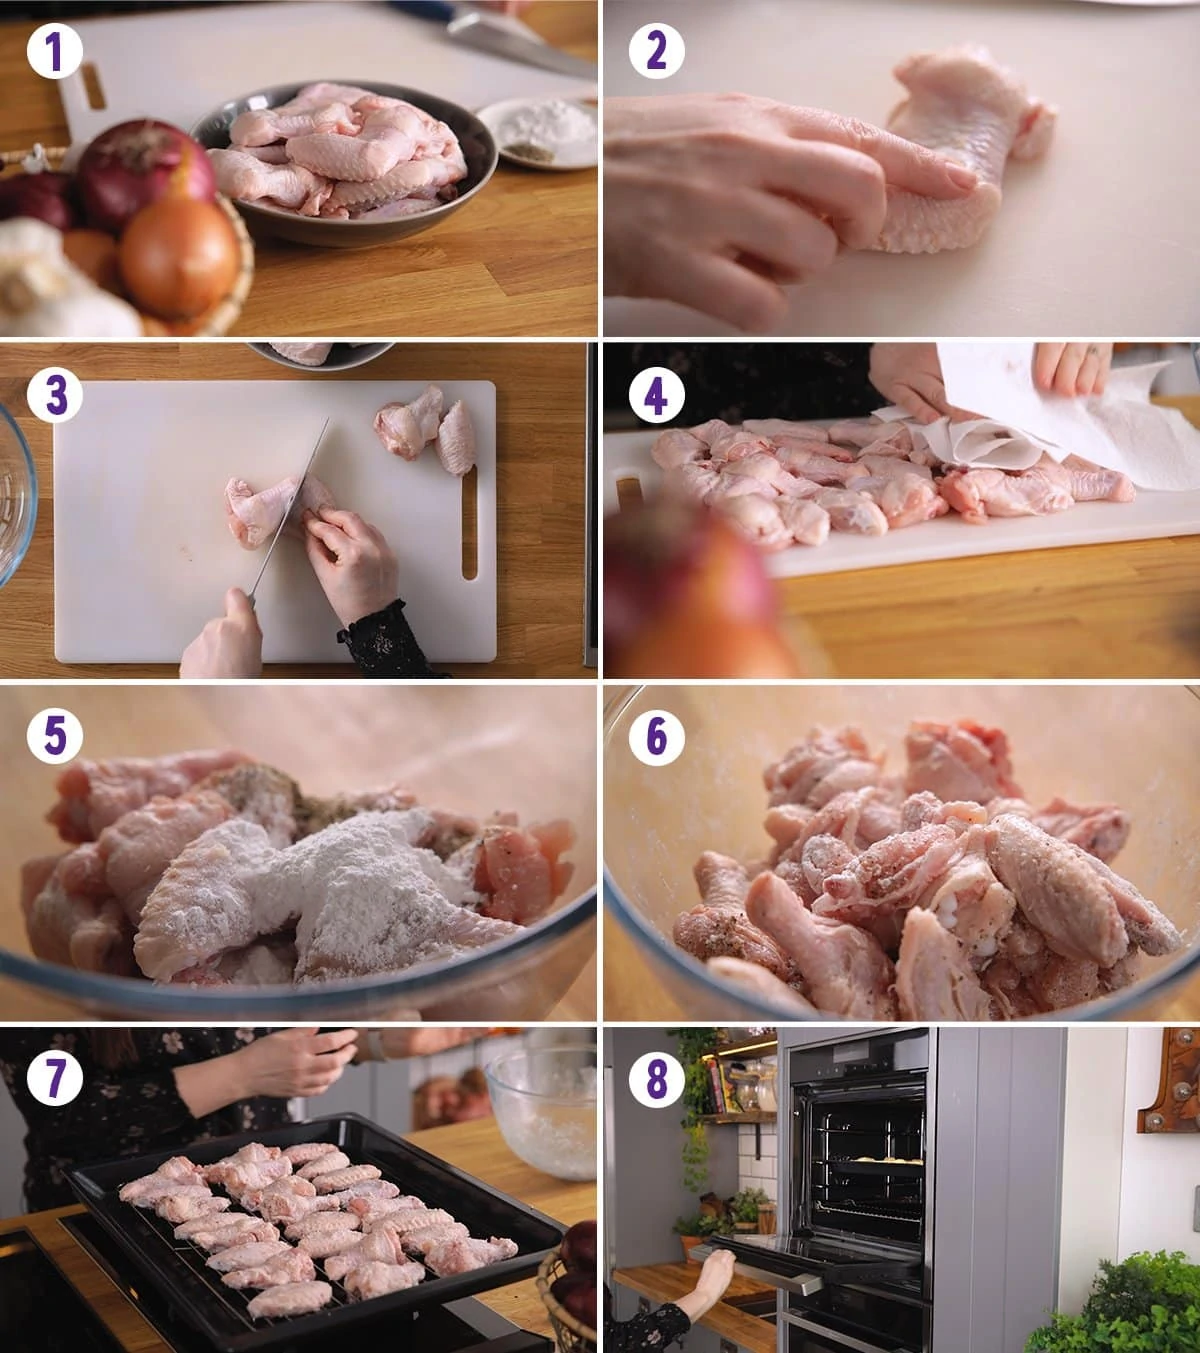 8 image collage showing how to make crispy oven baked chicken wings